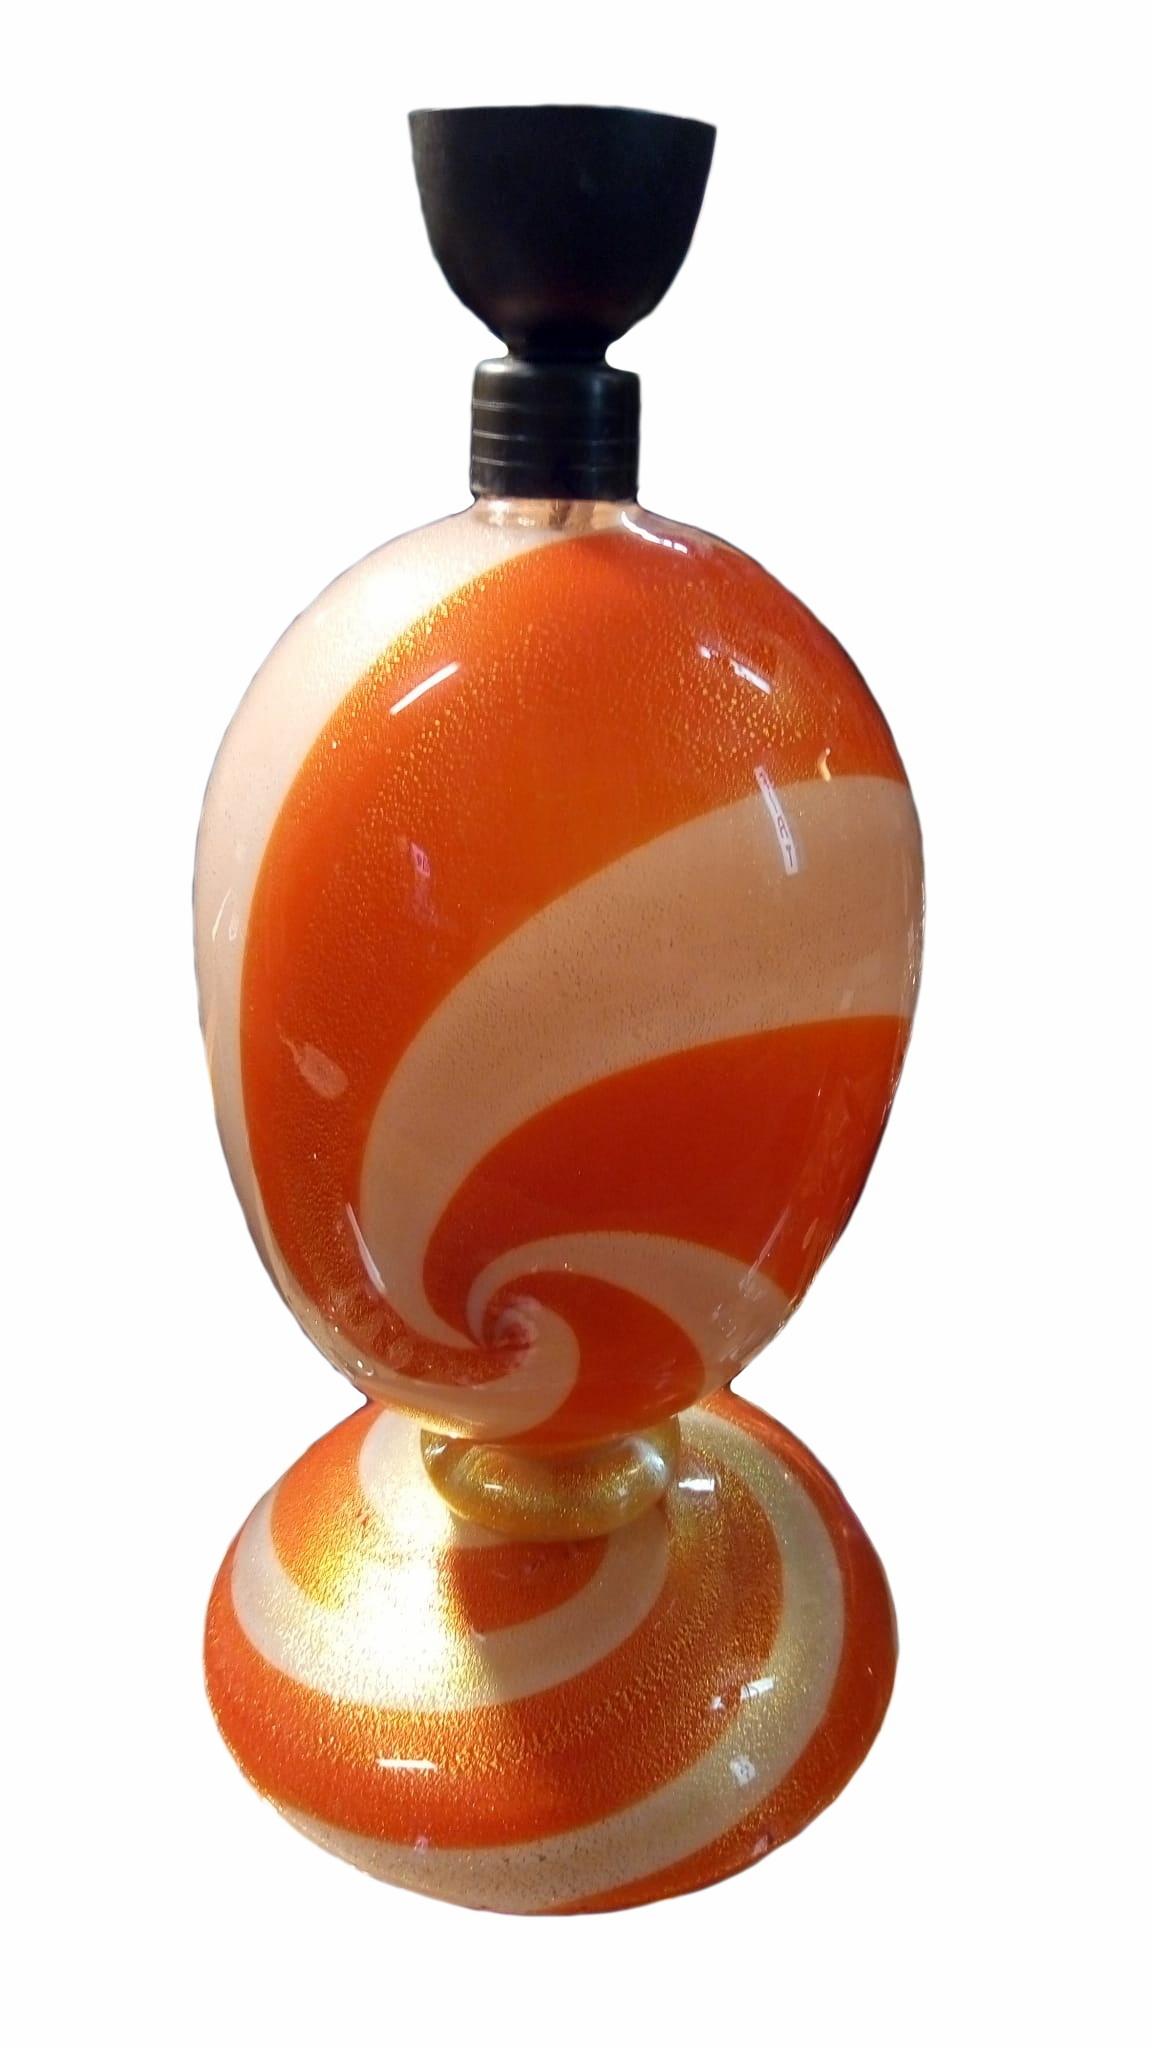 This is a table lamp by Seguso, Murano Italy, in an orange and white swirl design almost looking like a candy cane from the 1960s. And of course the lampshade can be altered if needed. In very nice condition without chipping or cracks. Stands 48 cm